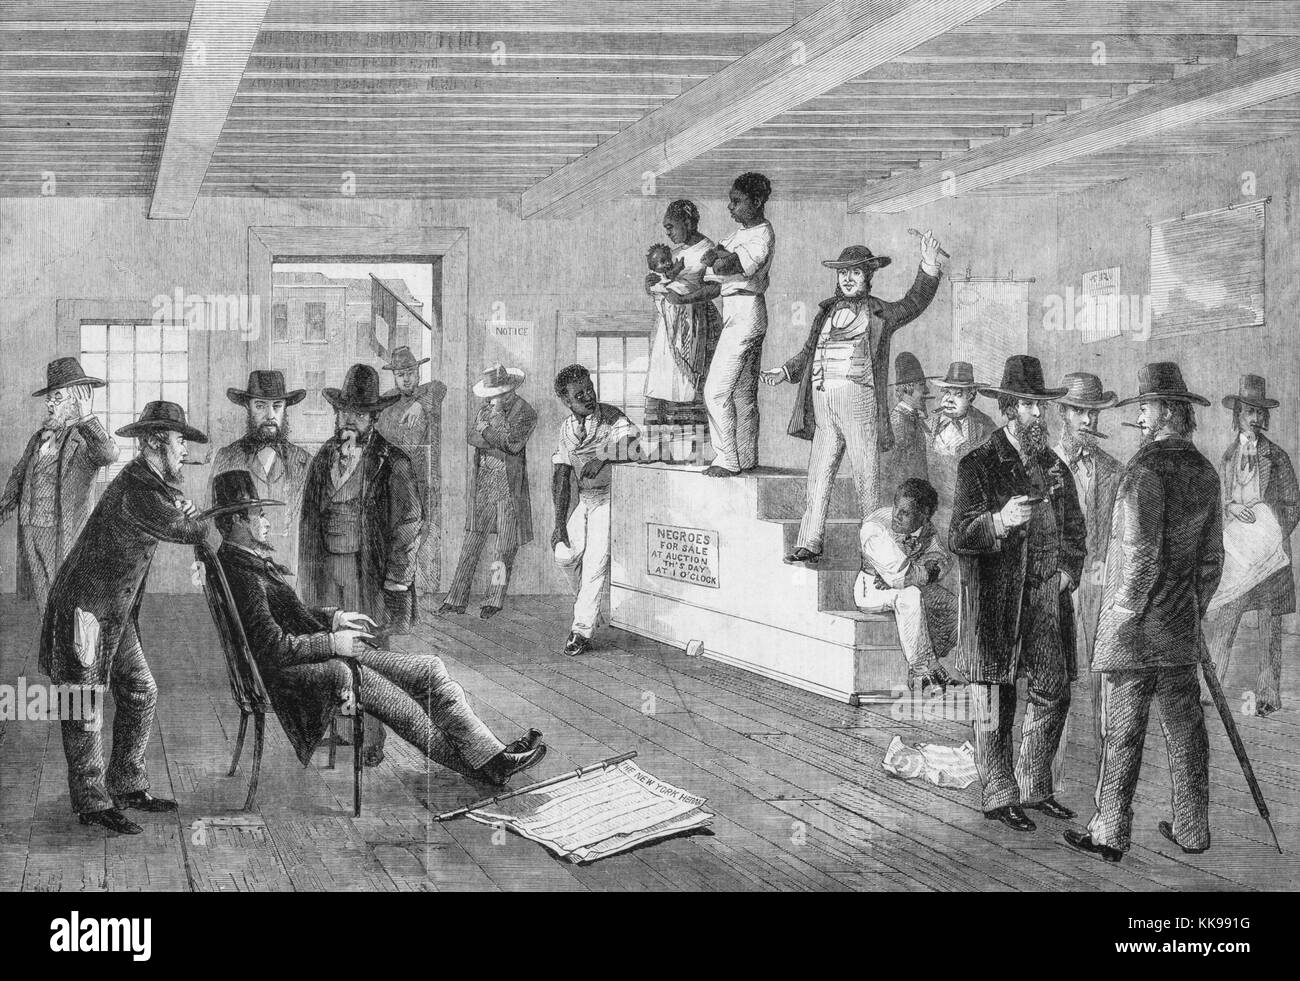 An etching from a painting of a slave auction, a black man stands next to a black woman holding her child on top of a raised platform, two other black men are seen leaning and sitting on the edges of the platform, a white auctioneer addresses the crowd of white men from the platform, the other men are standing and conversing throughout the room, Virginia, 1861. From the New York Public Library. Stock Photo